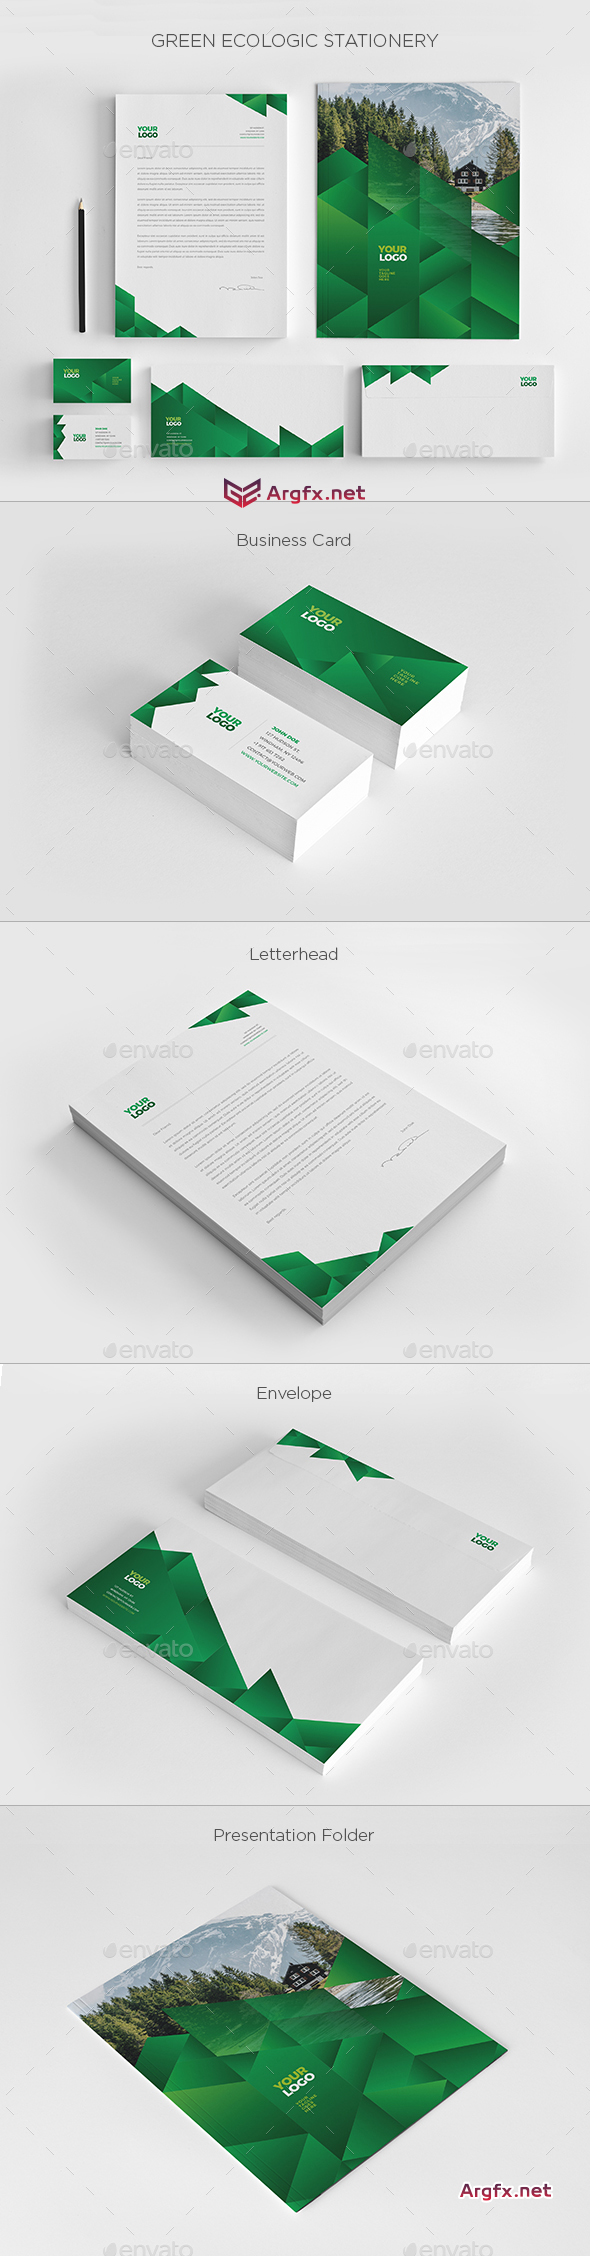  GraphicRiver - Green Ecologic Stationery 7476303